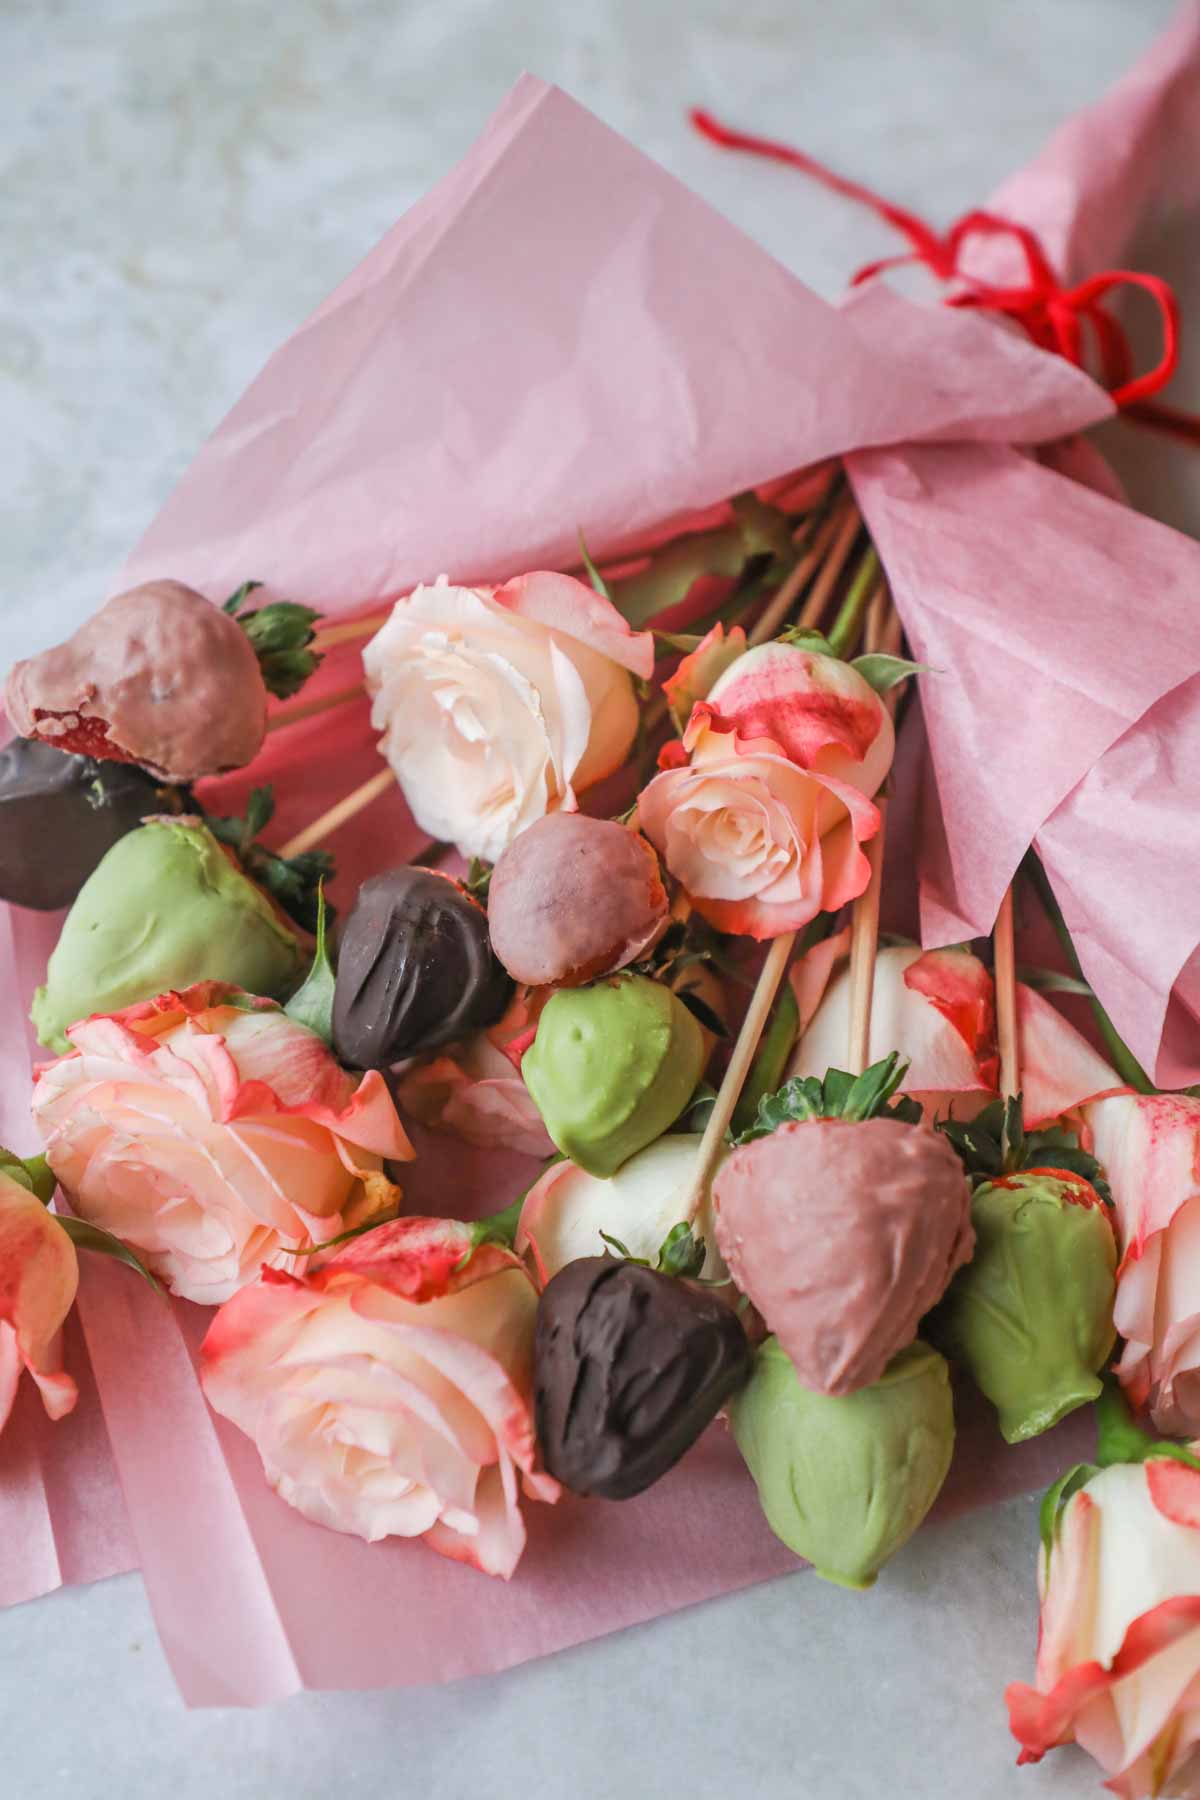 Chocolate dipped strawberry bouquet made with roses, matcha white chocolate strawberries, pink ruby chocolate strawberries, and classic chocolate strawberries.